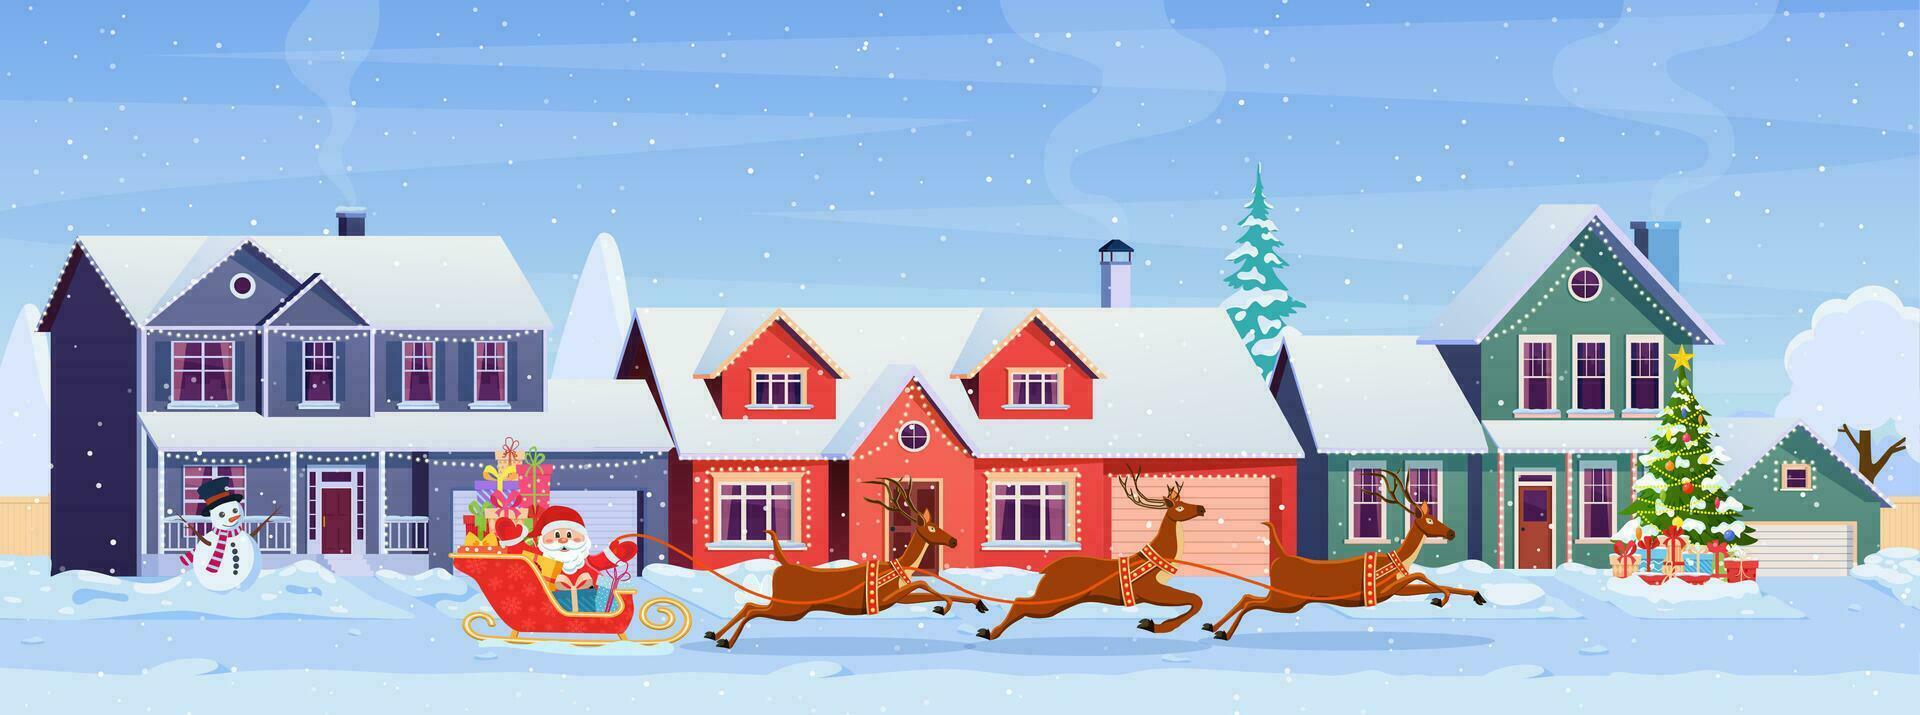 Residential houses with christmas decoration at day. cartoon winter landscape street with snow on roofs and holiday garlands, christmas tree, snowman. Santa Claus with deers Vector illustration